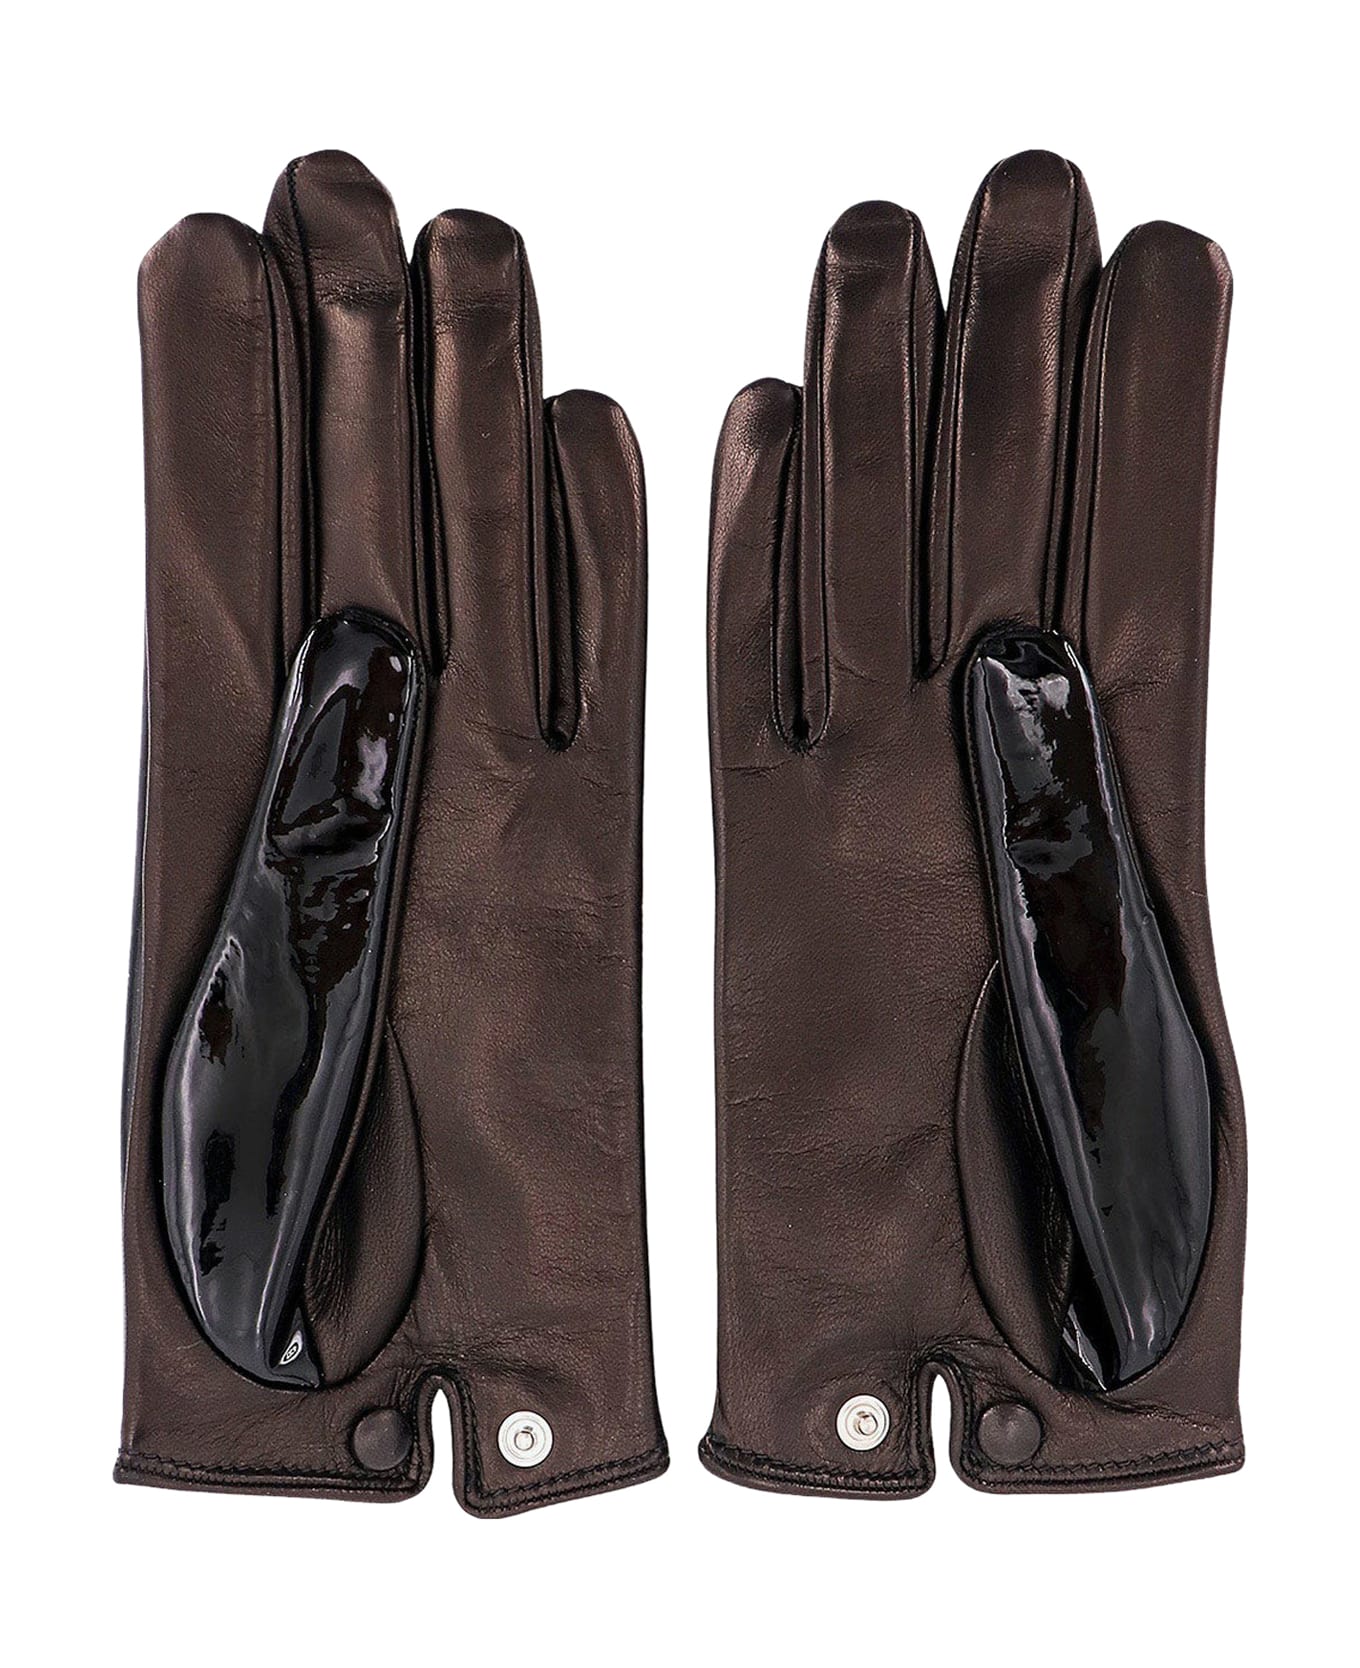 Durazzi Milano Patent And Calfskin Leather Gloves. Silk Lining - Black